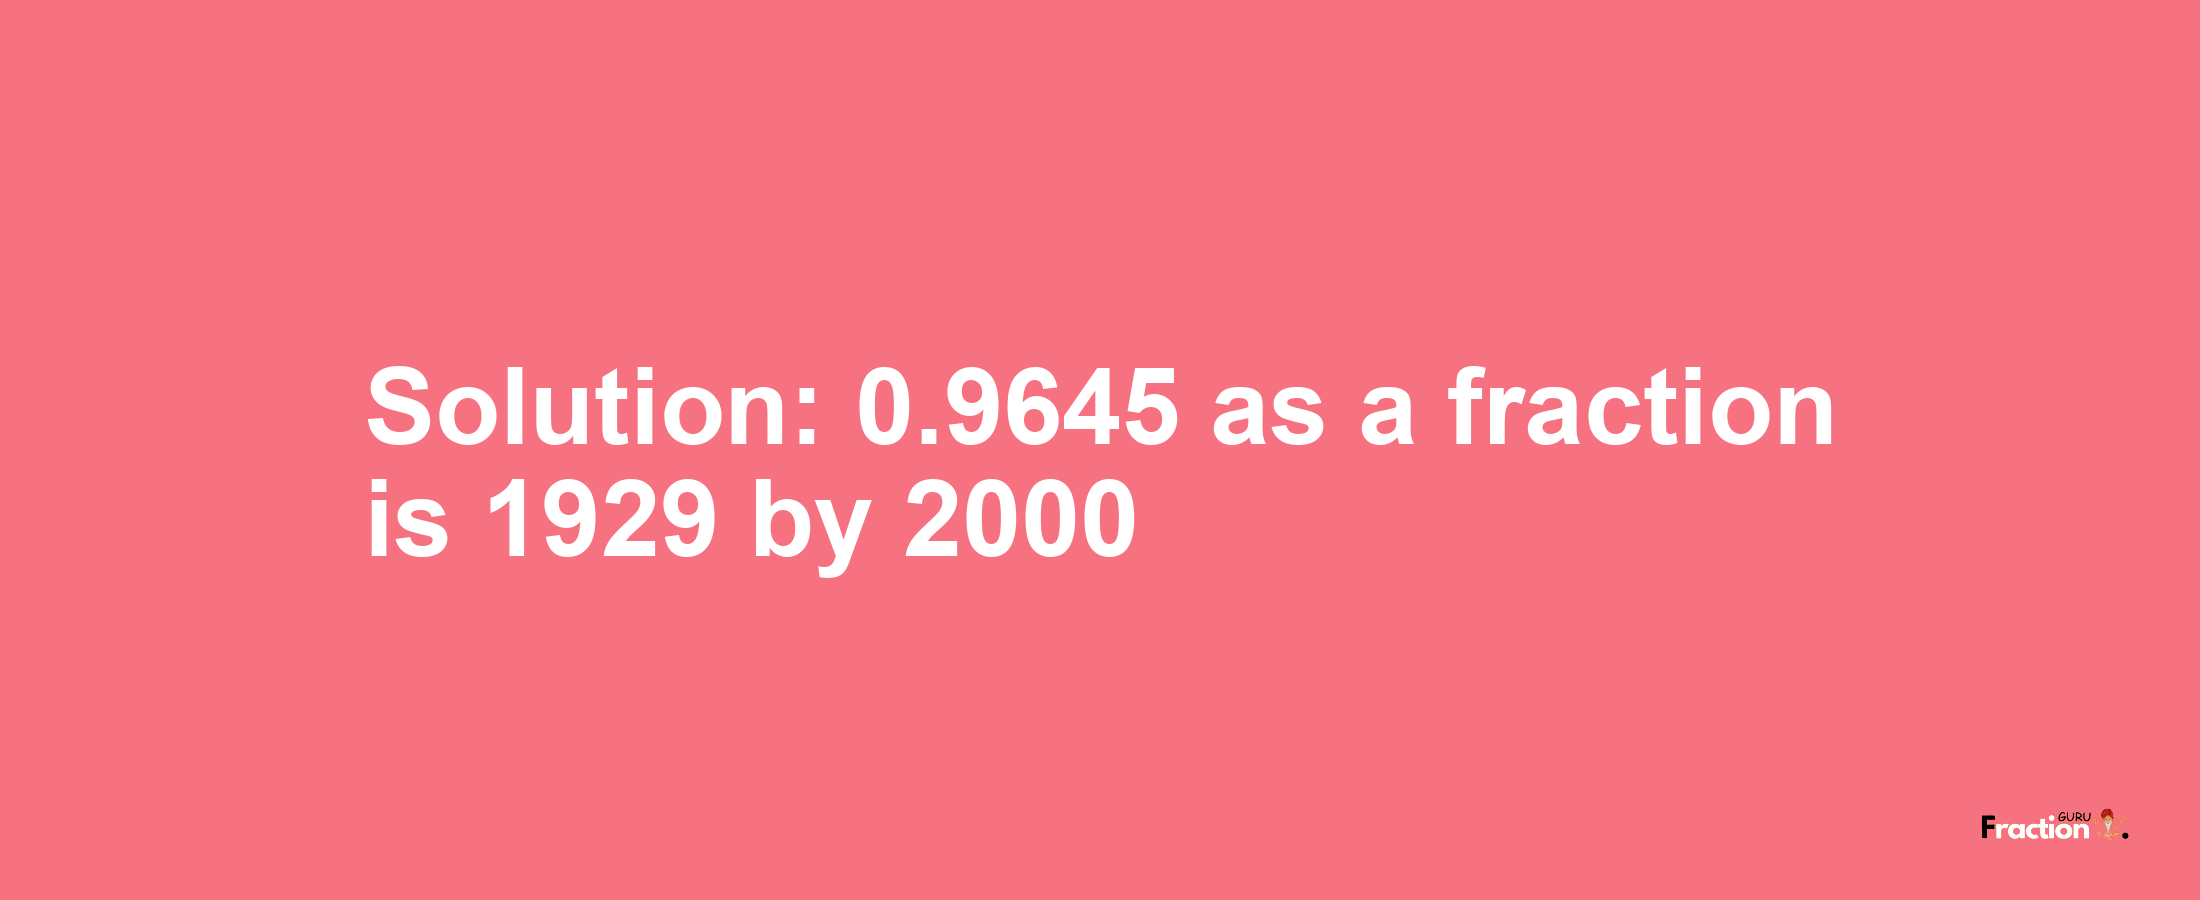 Solution:0.9645 as a fraction is 1929/2000